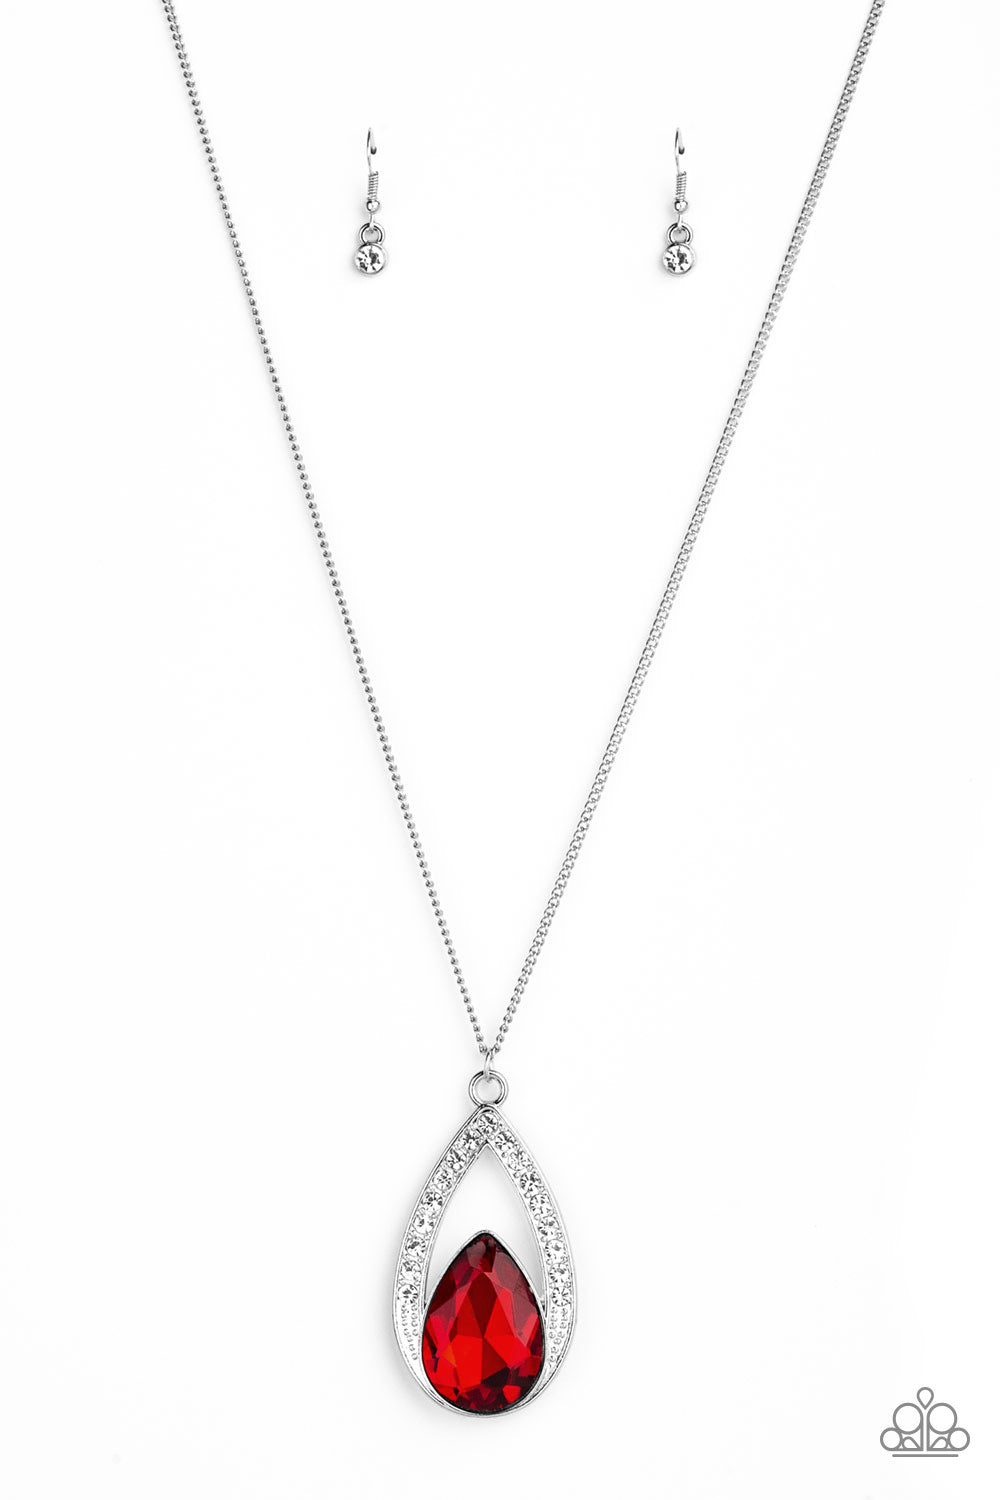 Paparazzi Notorious Noble - Red Pendant Necklace - A Finishing Touch 